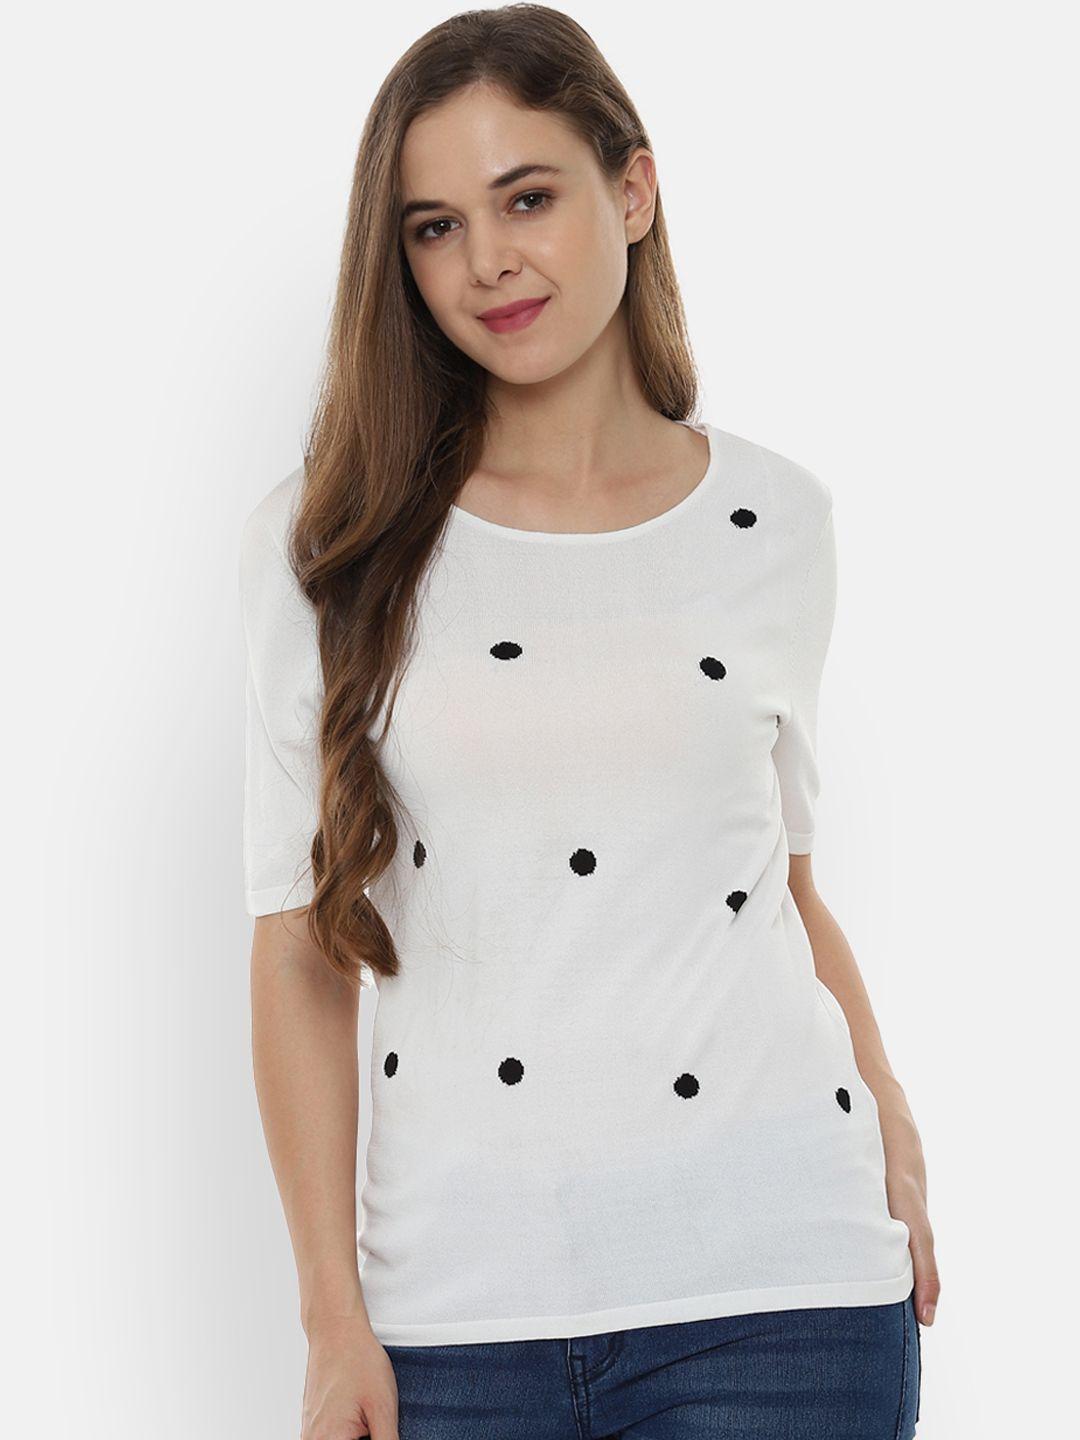 allen solly woman white printed top